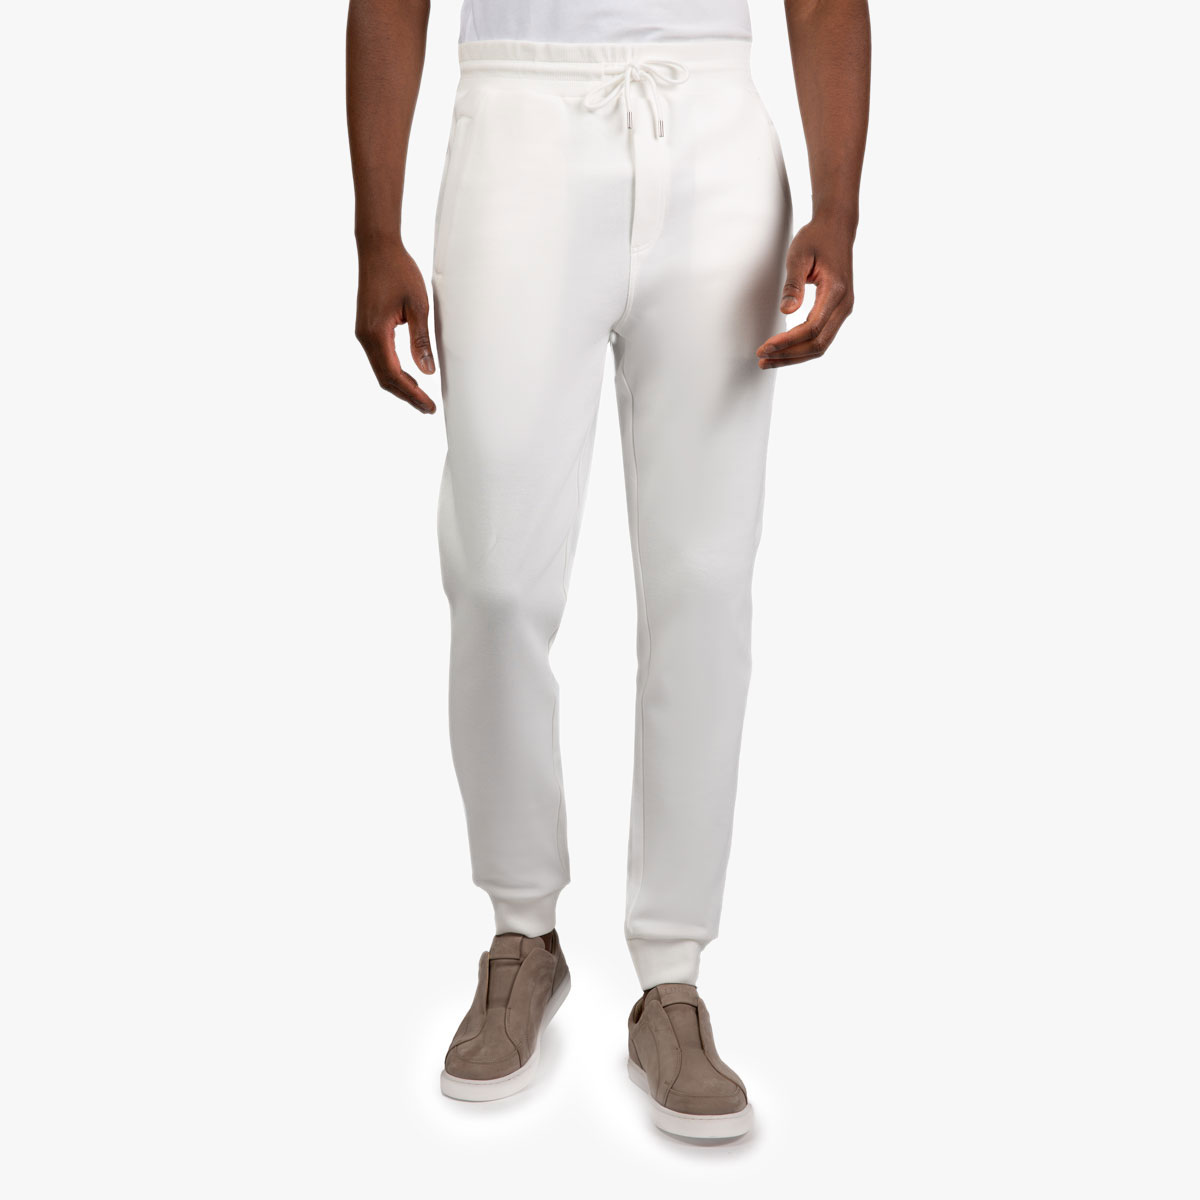 Sweatpants in off-white